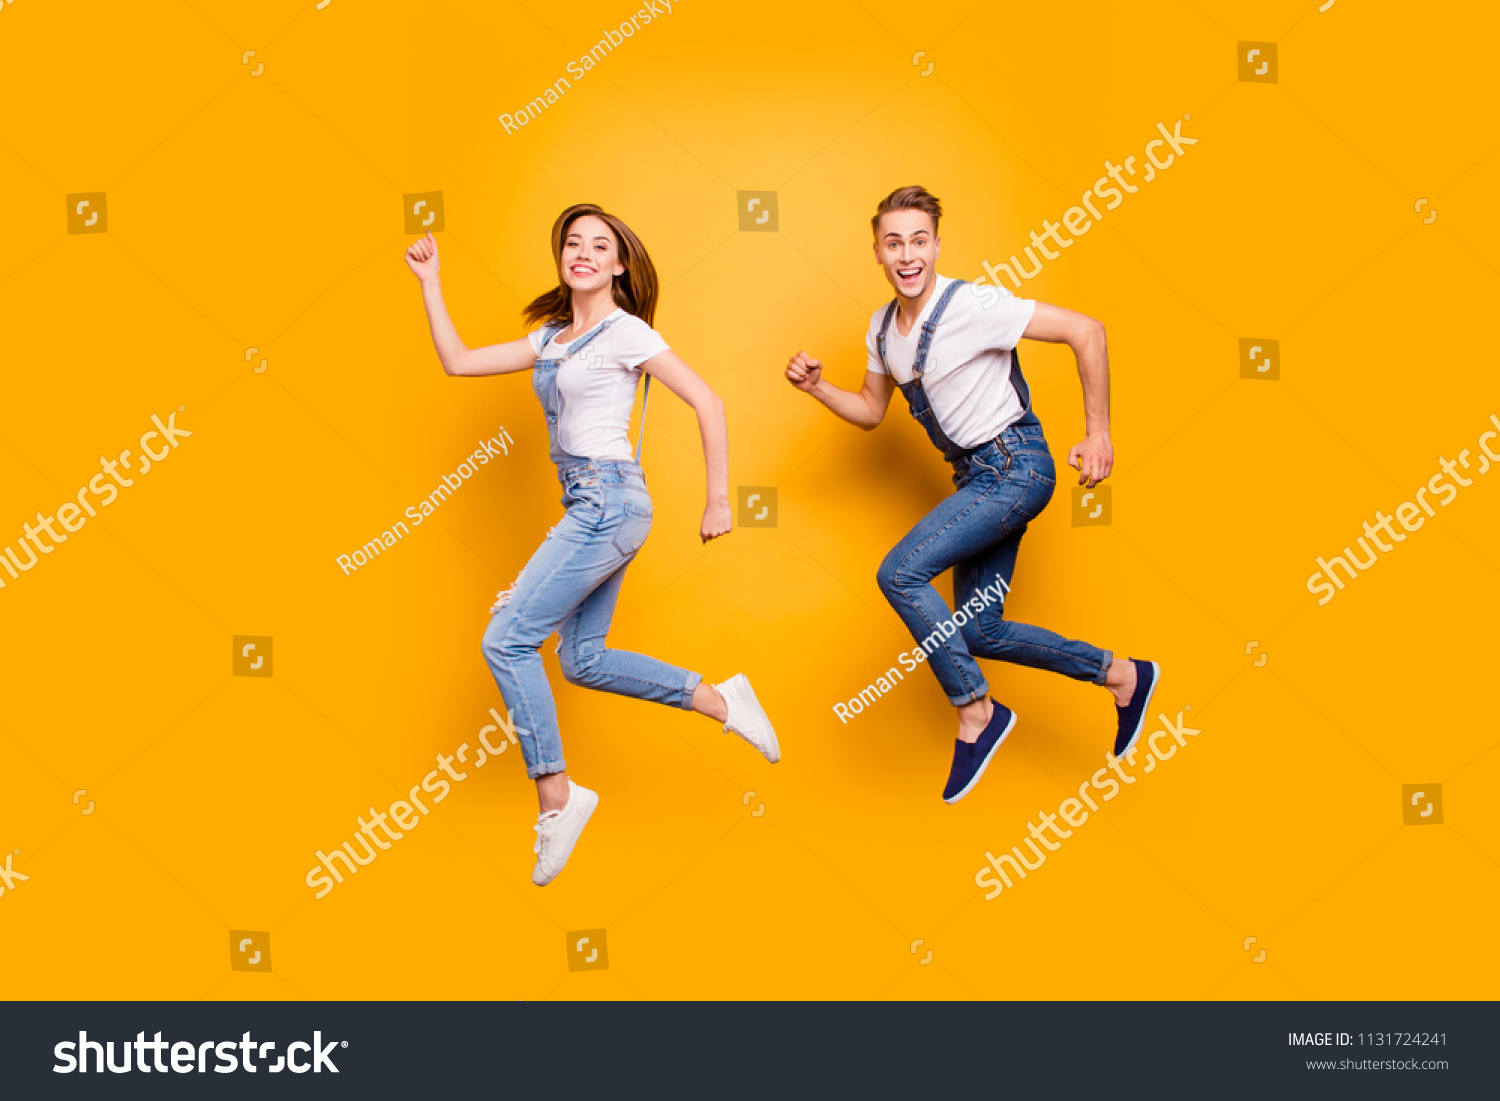 Summer dreamy student freedom fly teen age youth person concept. Side view full size length photo portrait of two cheerful rejoicing attractive handsome guy lady making movement isolated background #1131724241